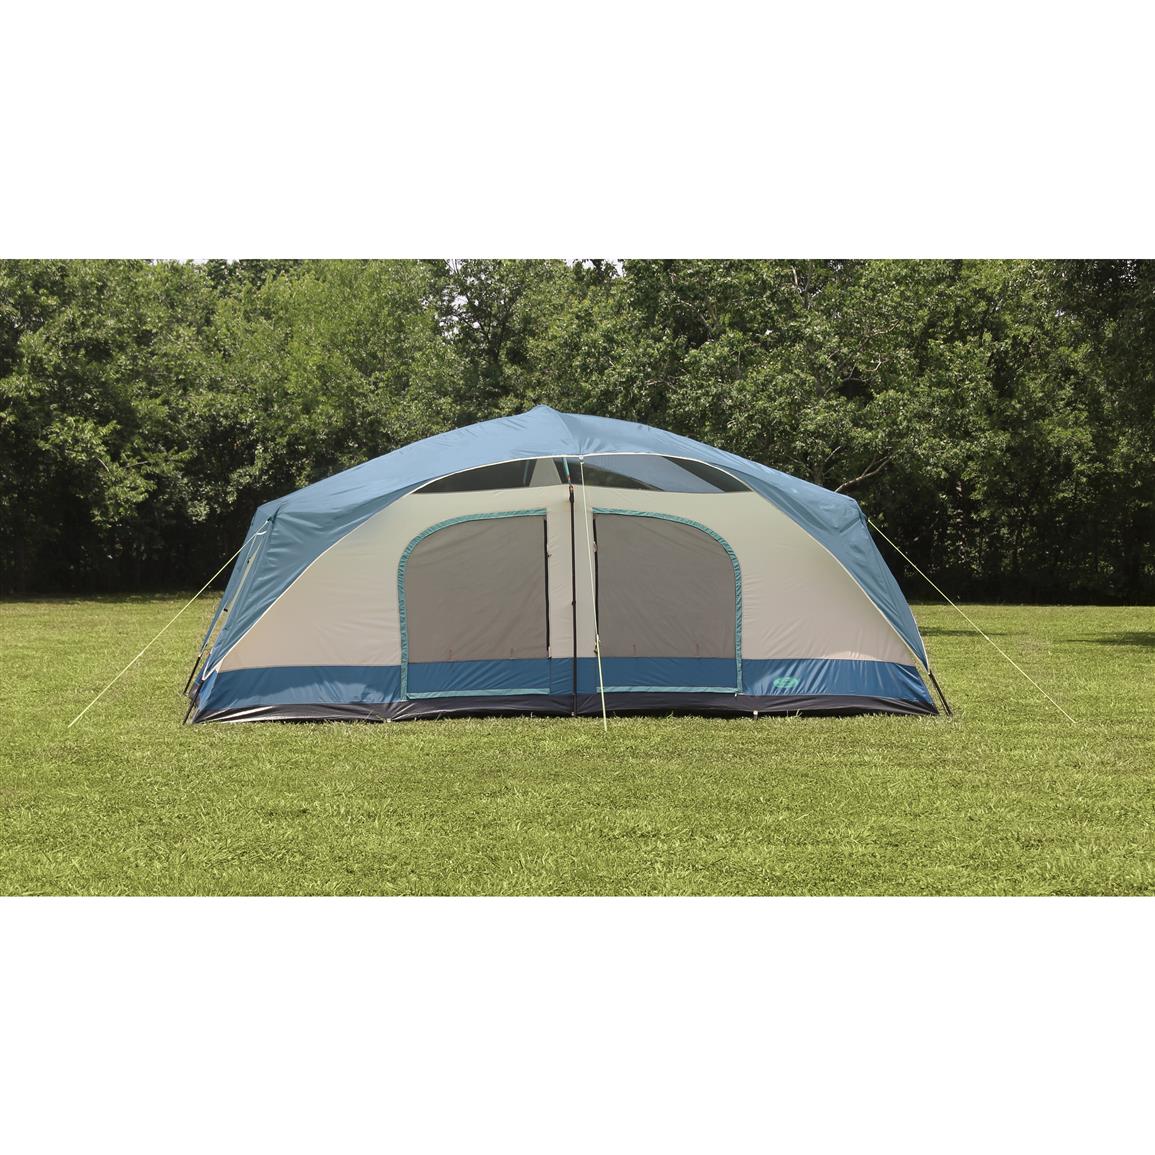 Texsport Blue Mountain 2Room Cabin Dome Tent 656533, Cabin Tents at Sportsman's Guide